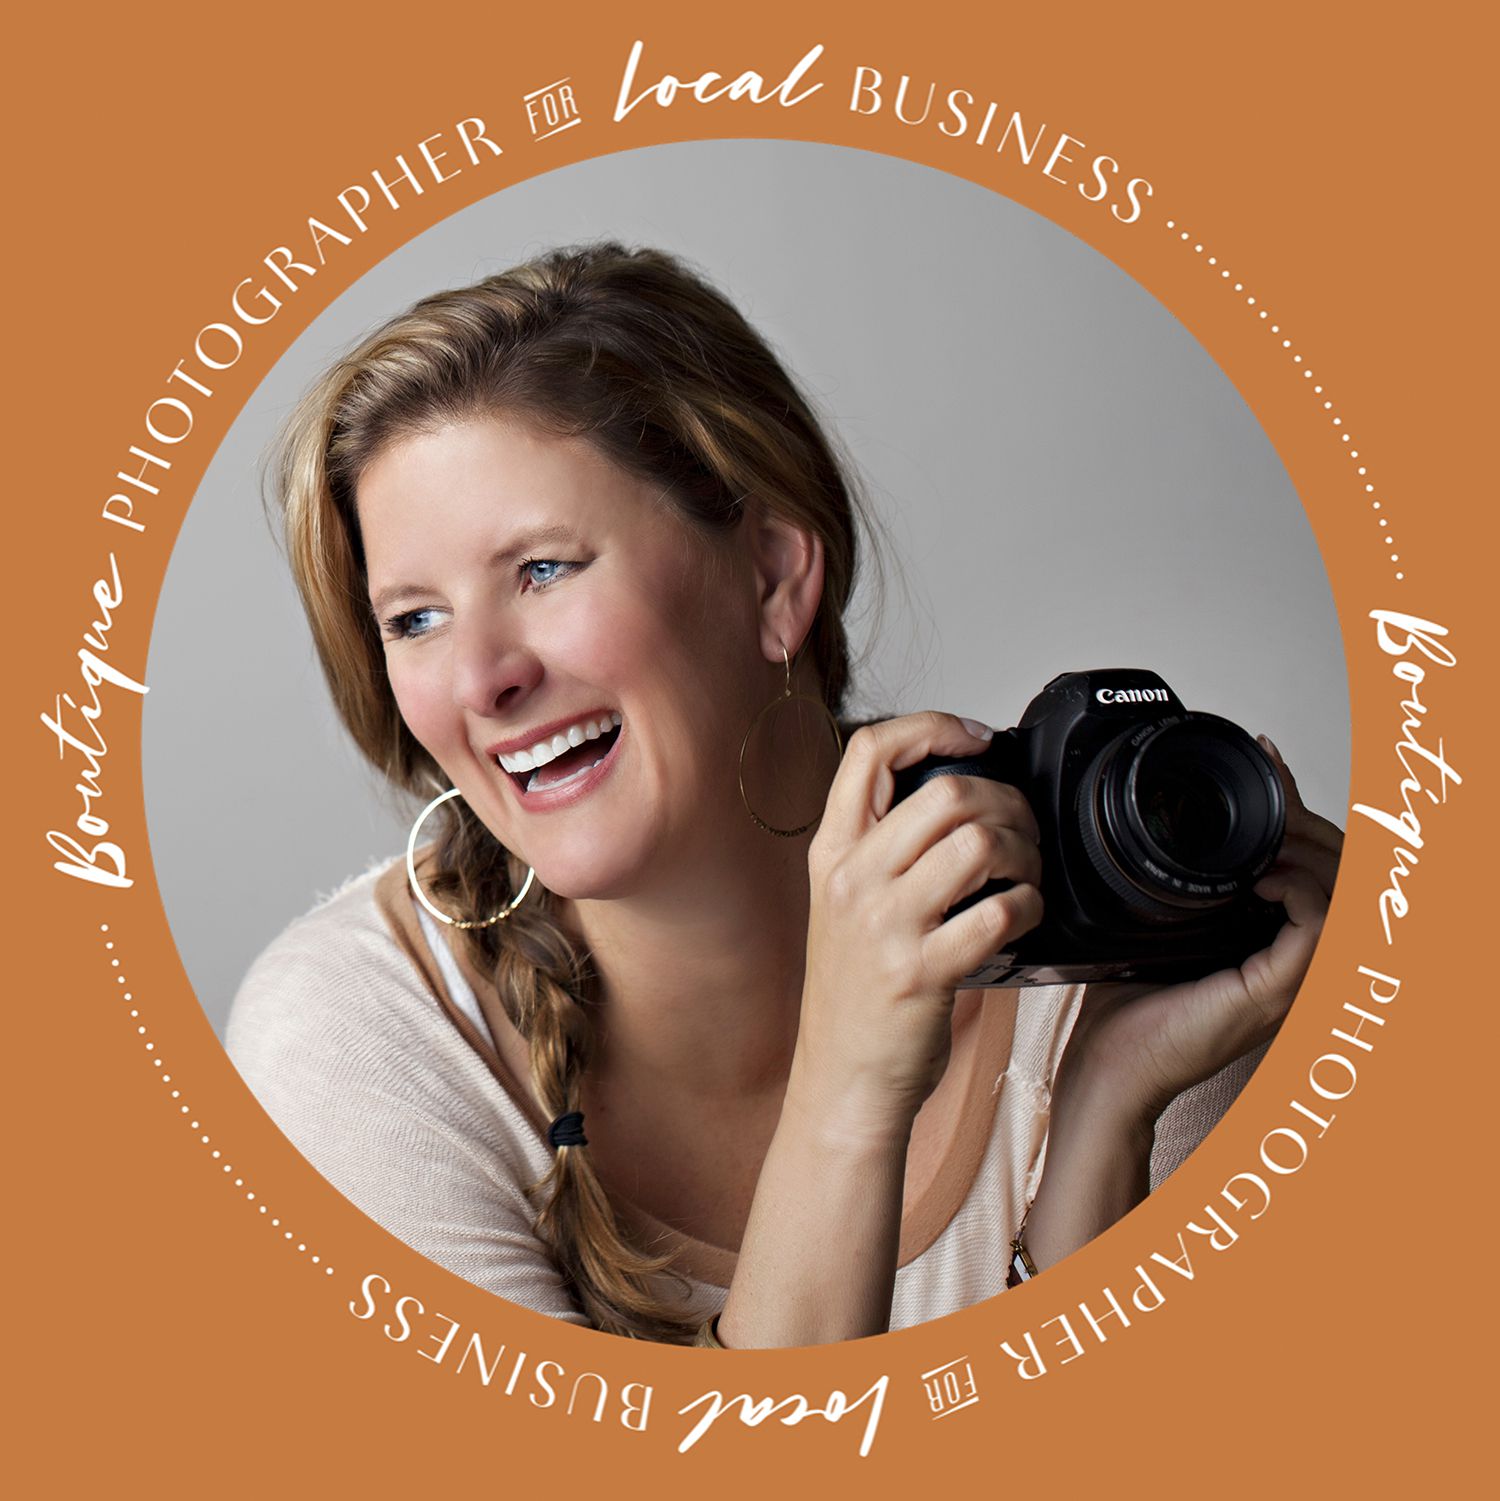 4 Ways to Get Portrait Photography Client Referrals From Local Businesses